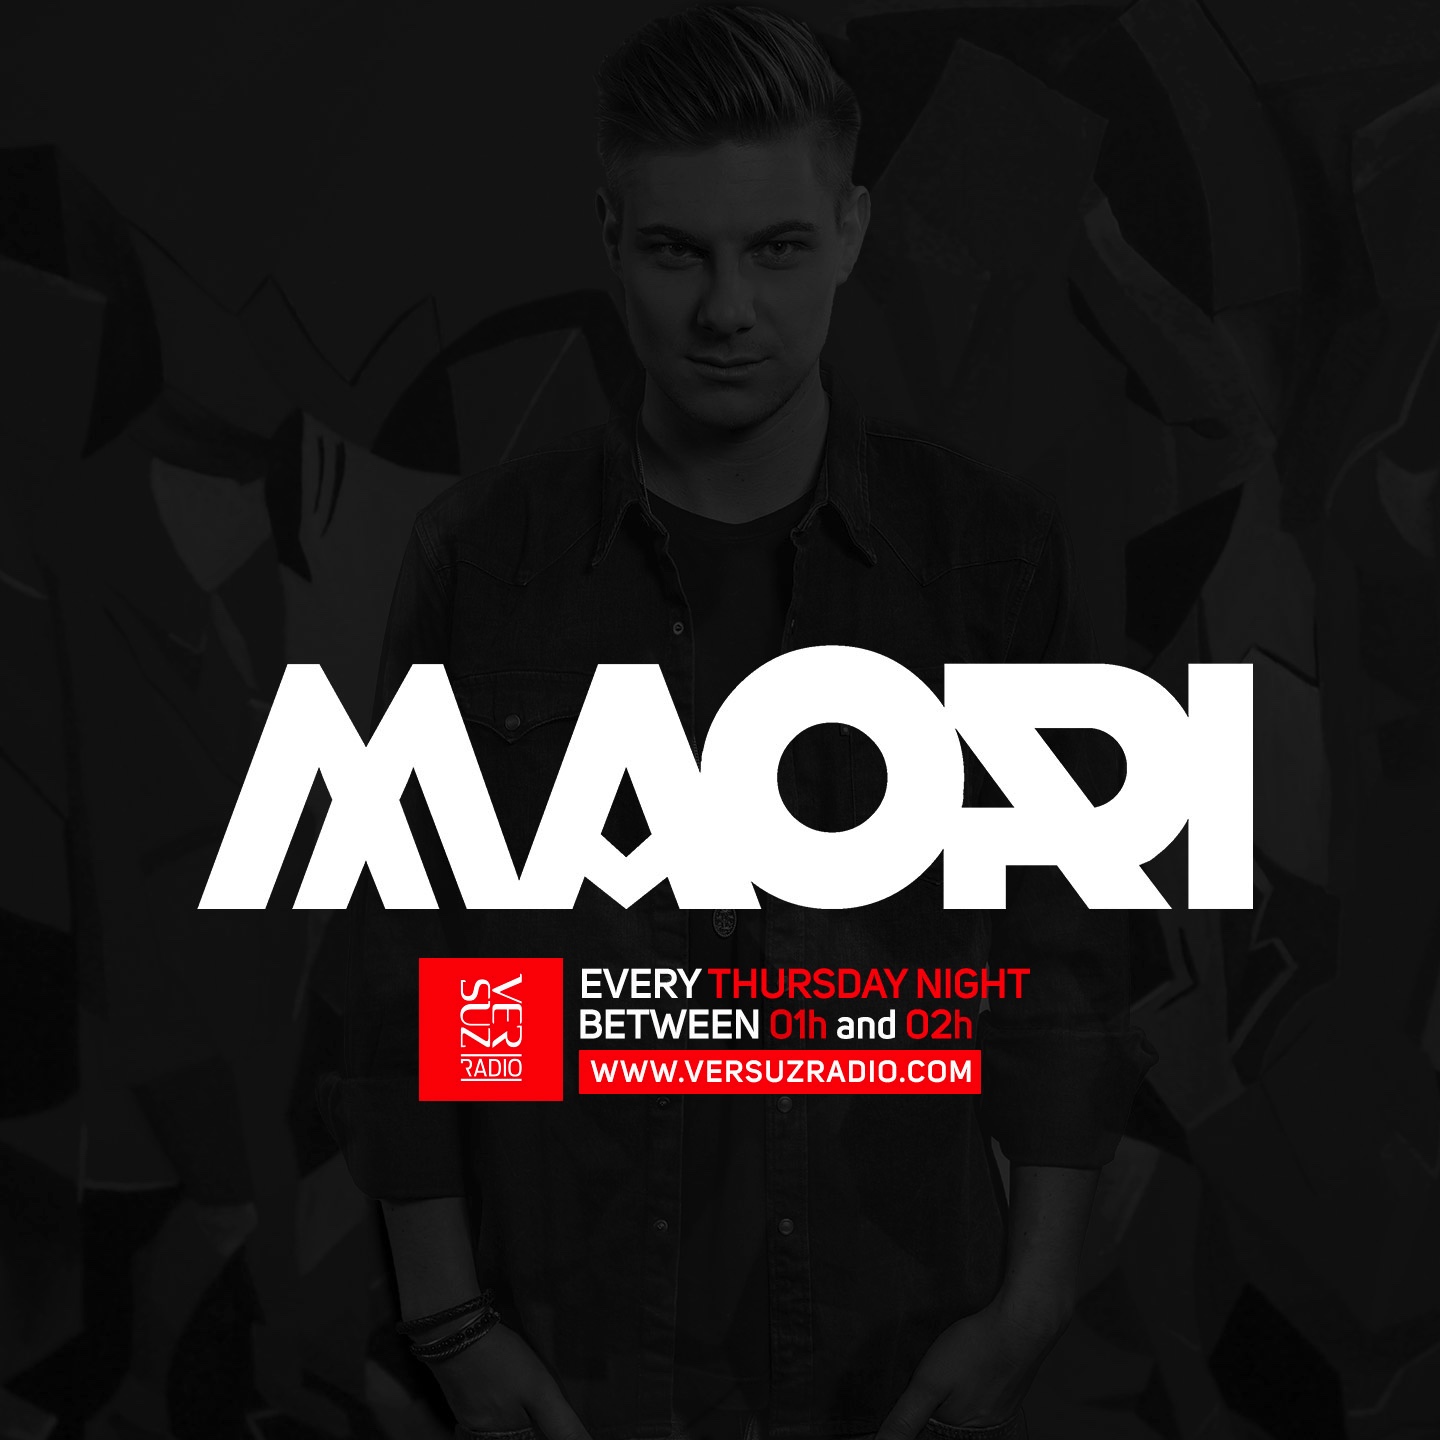 Clubhouse Radio by Maori - Episode #023